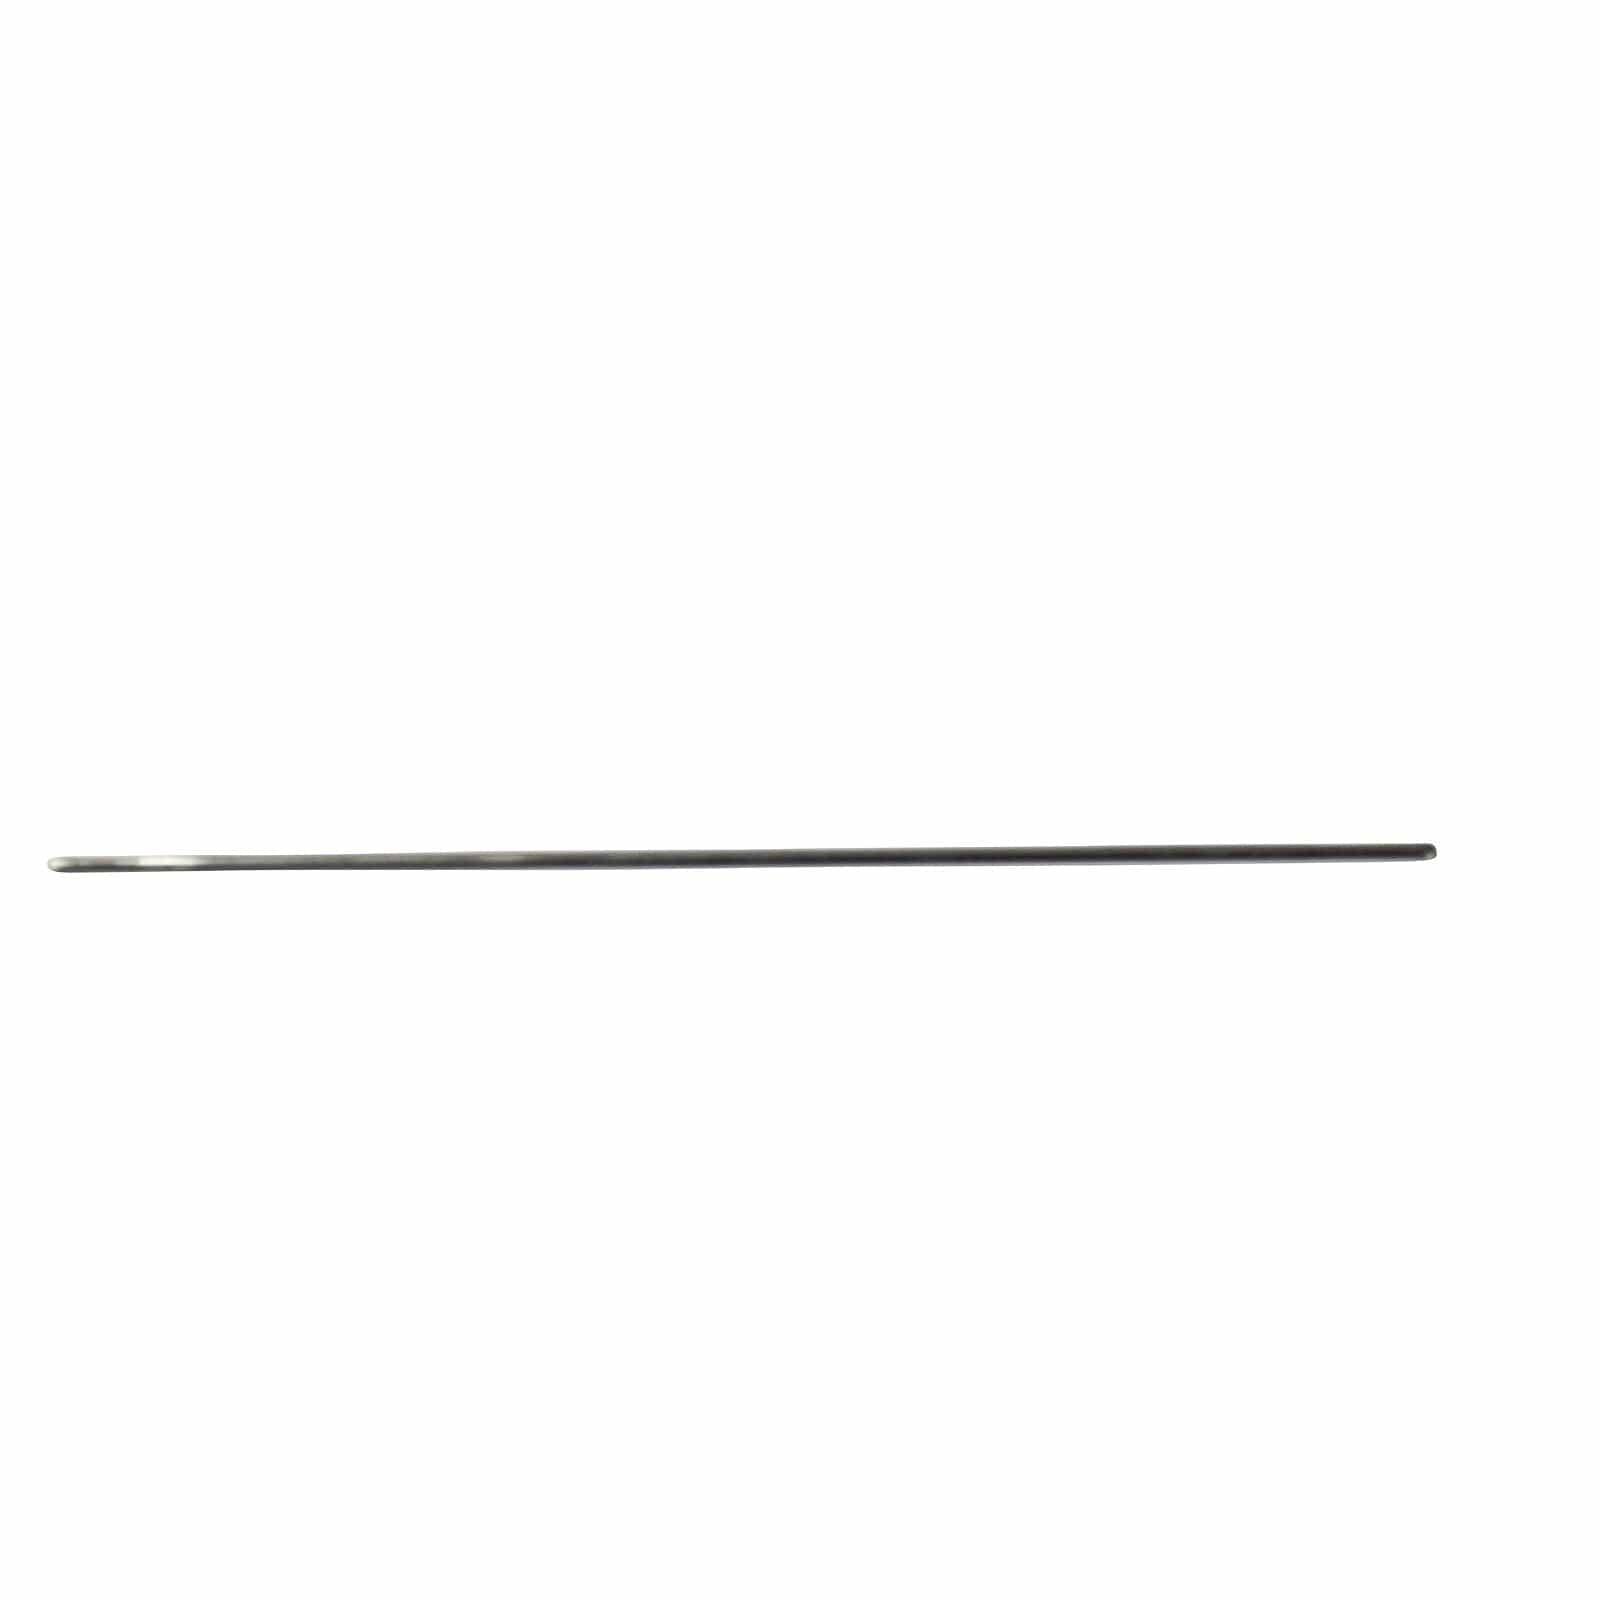 Armo Surgical Instruments 14cm (2mm Dia) / Blunt Armo Probe